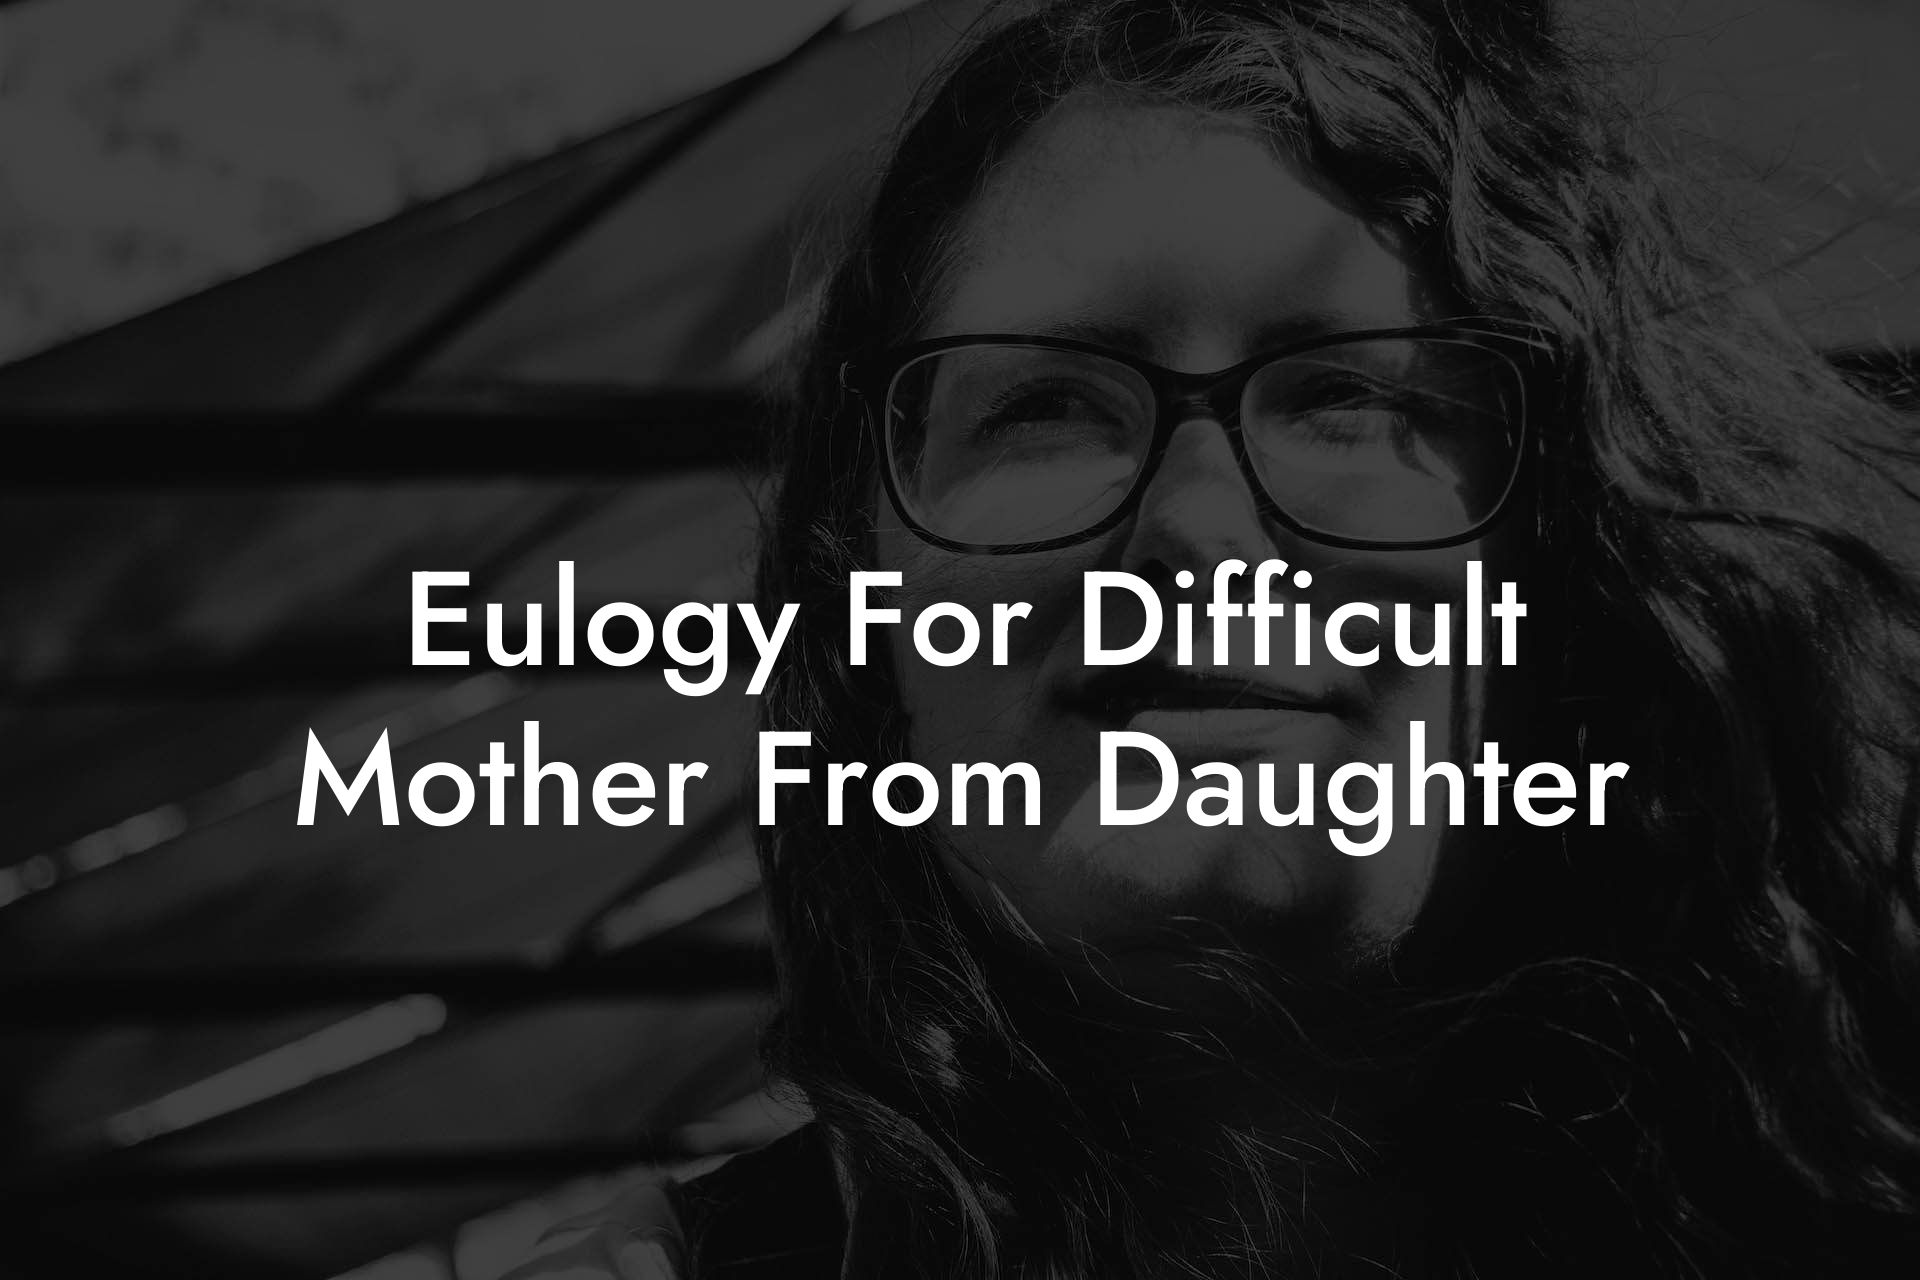 Eulogy For Difficult Mother From Daughter